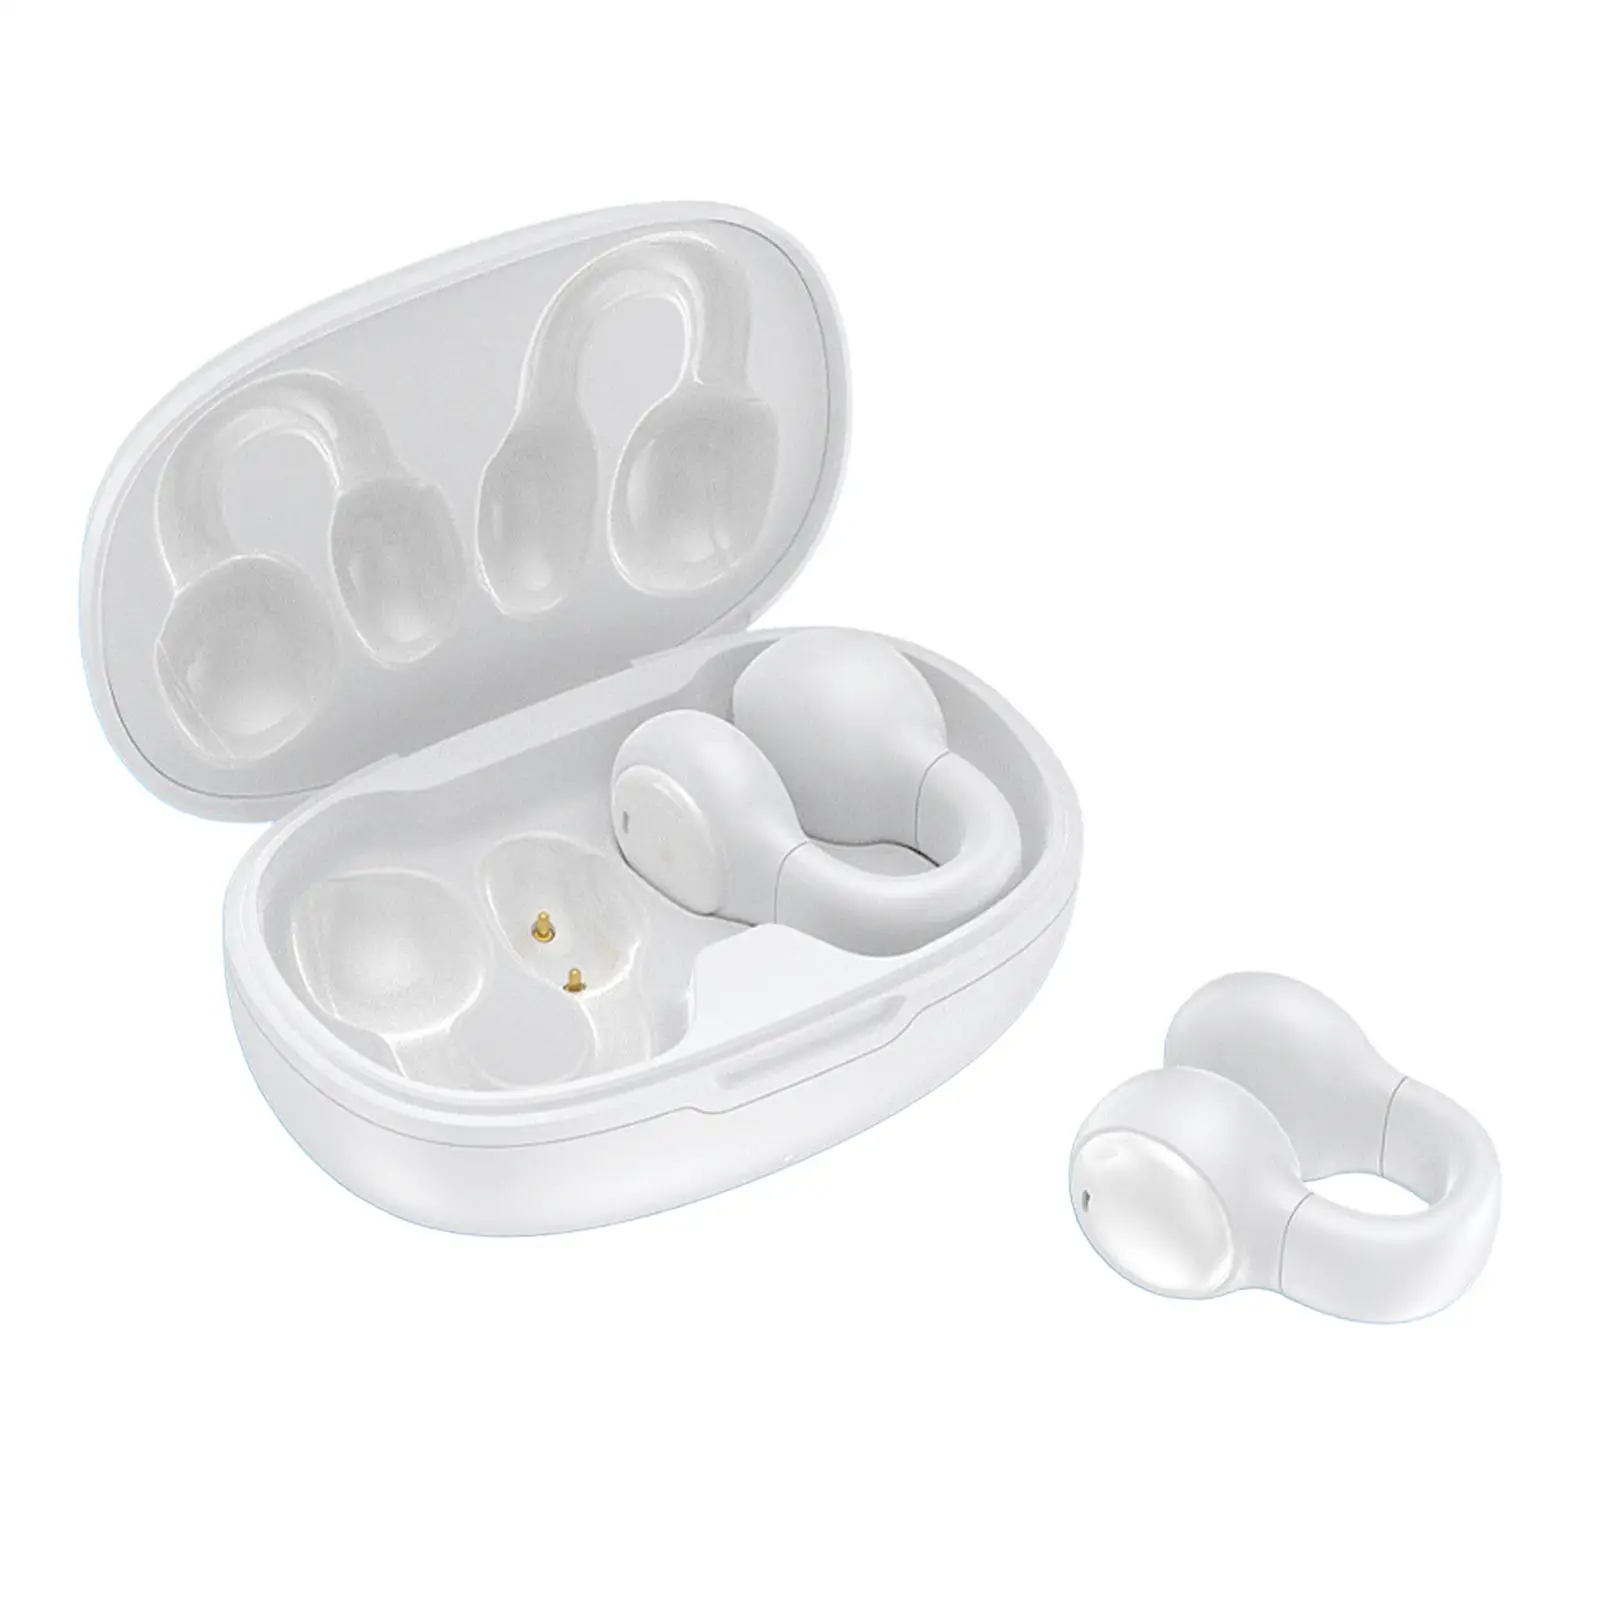 Ear Clip Headphones with Case Calling Noise Canceling Earphones Headset for Office